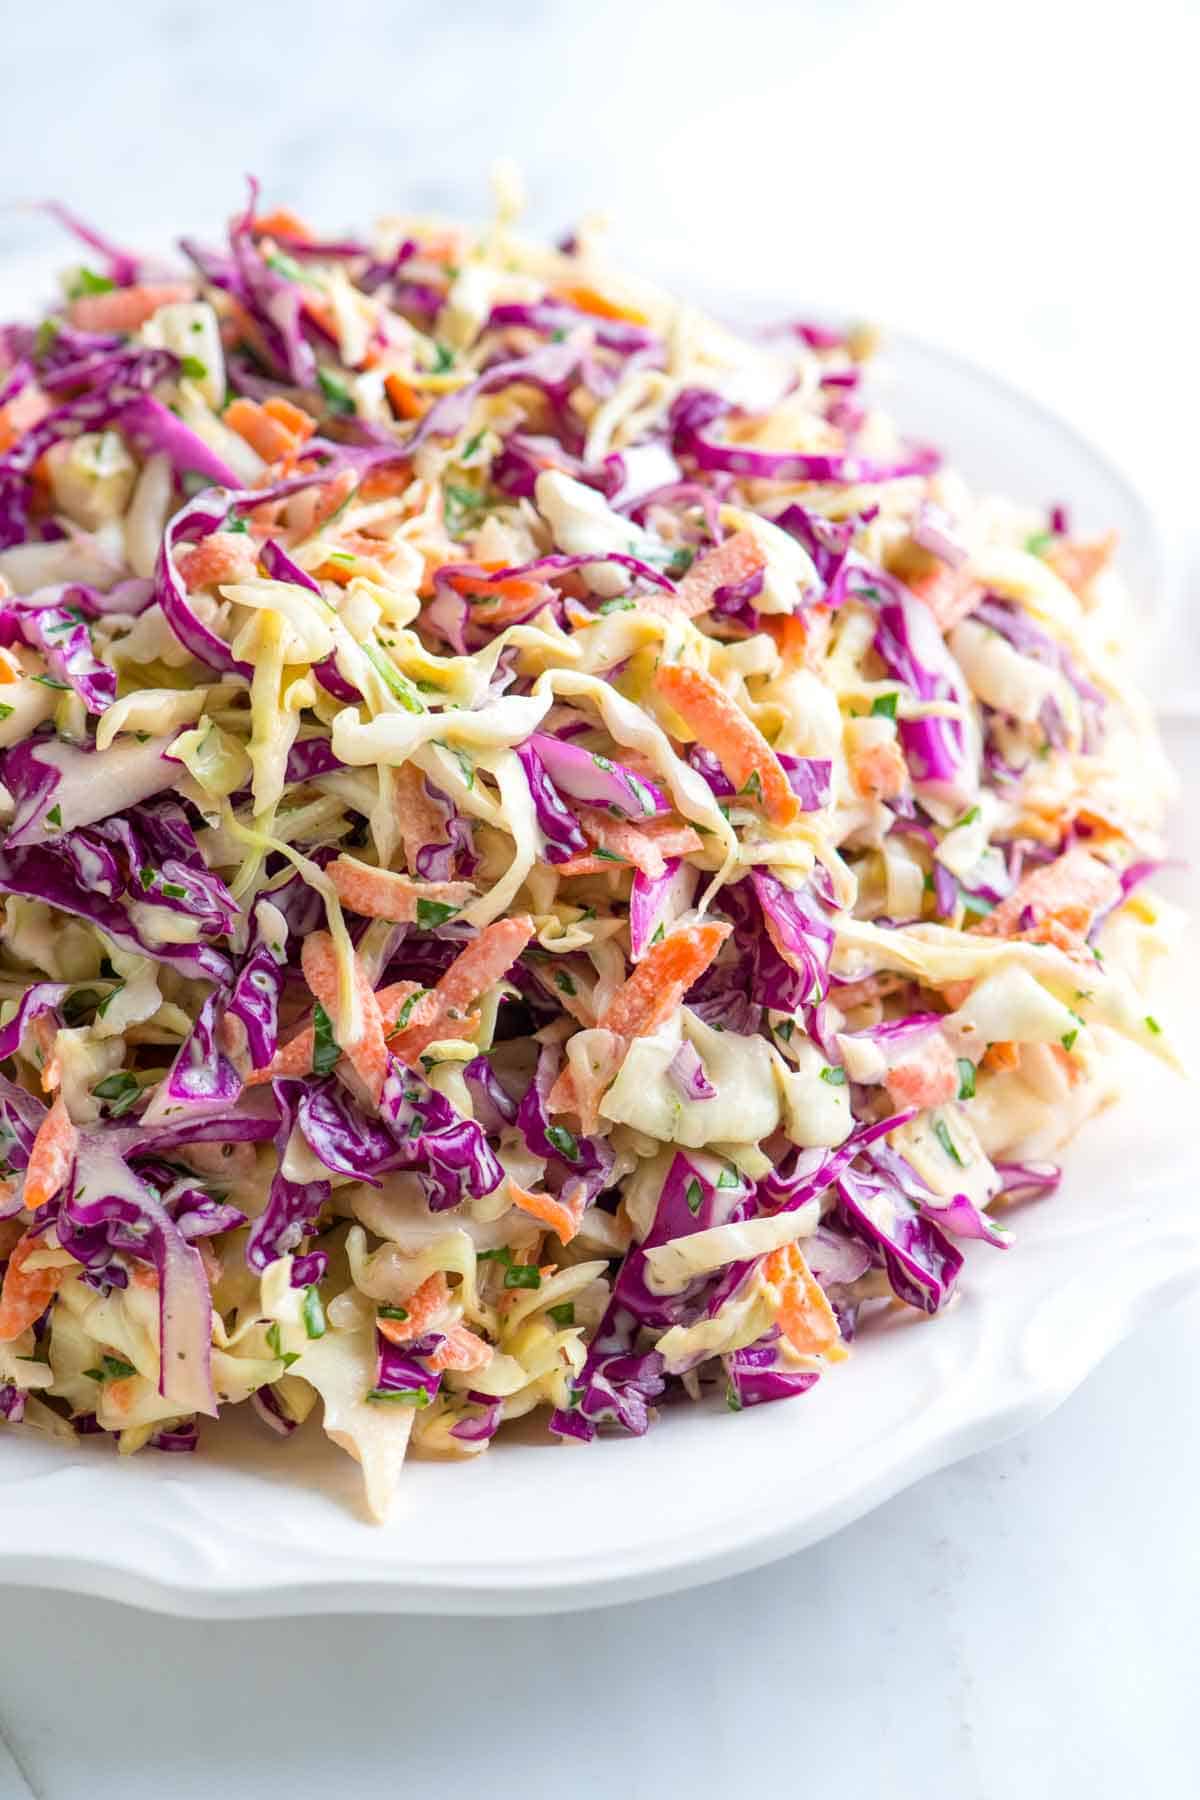 Classic BBQ Side Dishes - Light Coleslaw